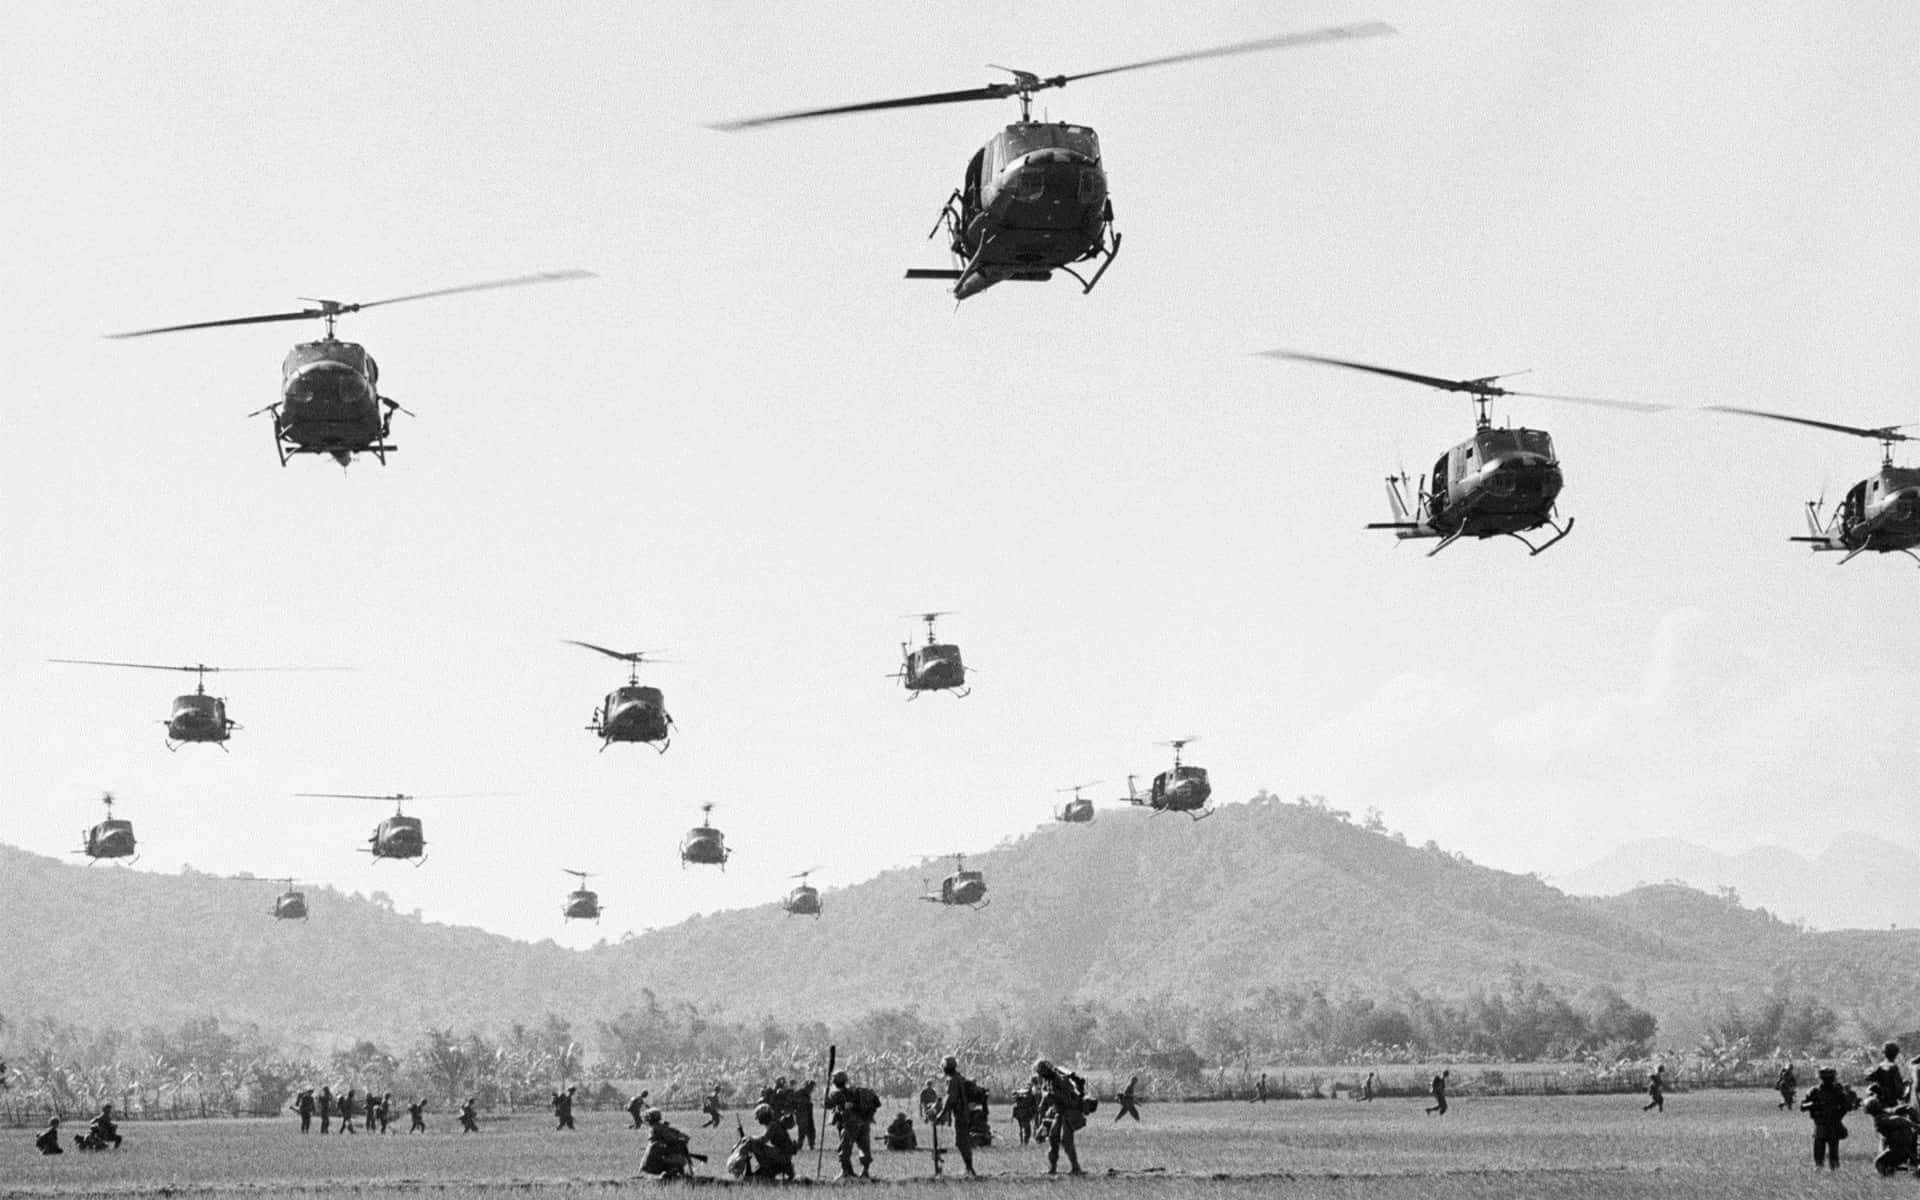 A Group Of Helicopters Flying Over A Field